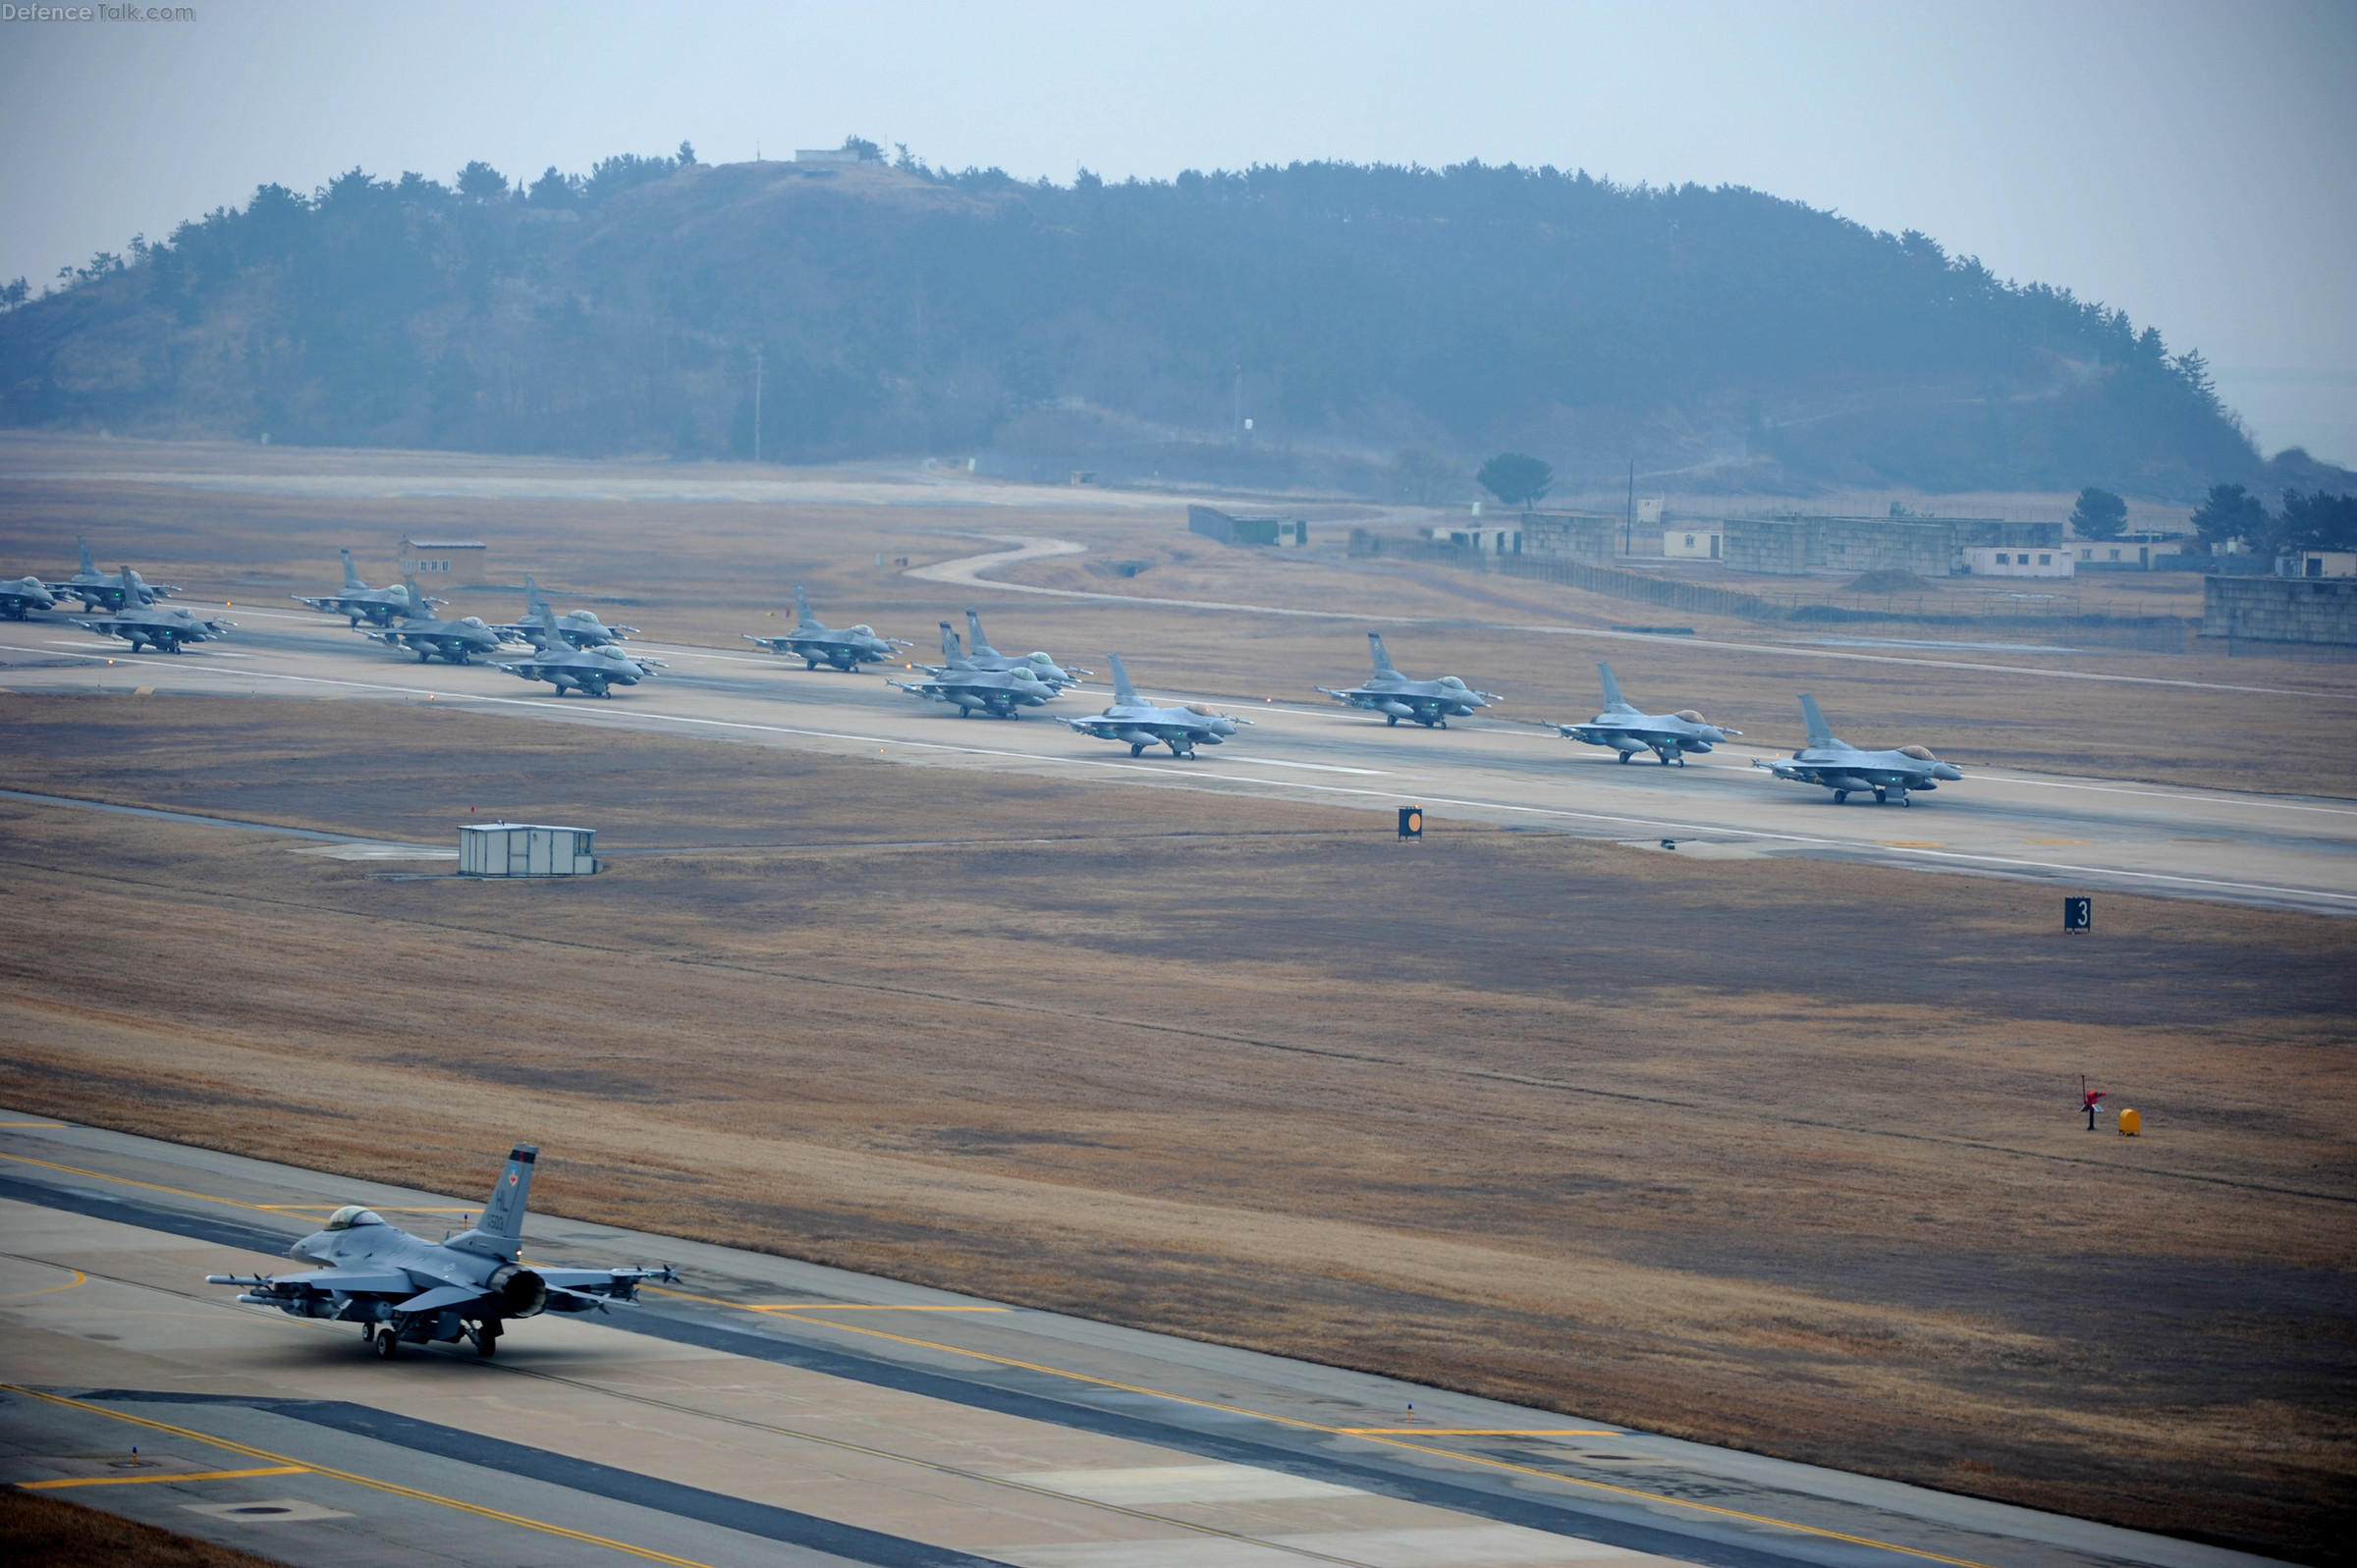 F-16 in formation - Airpower Display by USAF and ROK